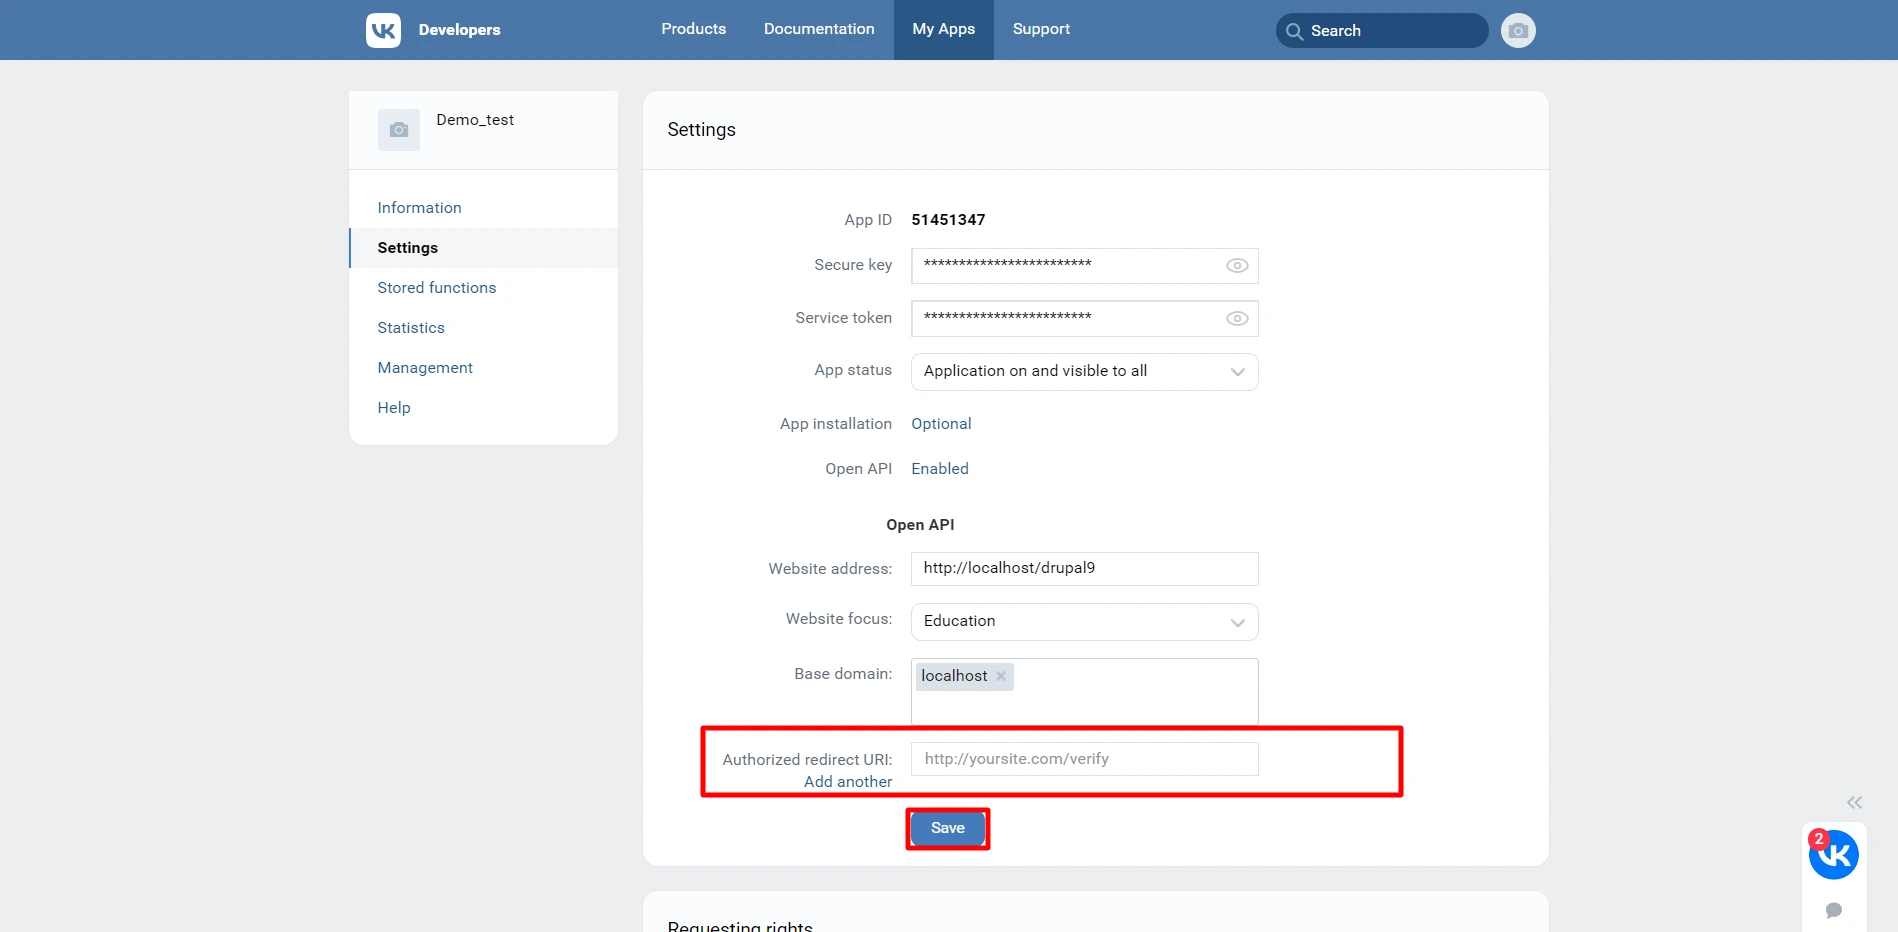 Vkontakte sso integration - To get secyre key and secure token and enter authorized redirect url